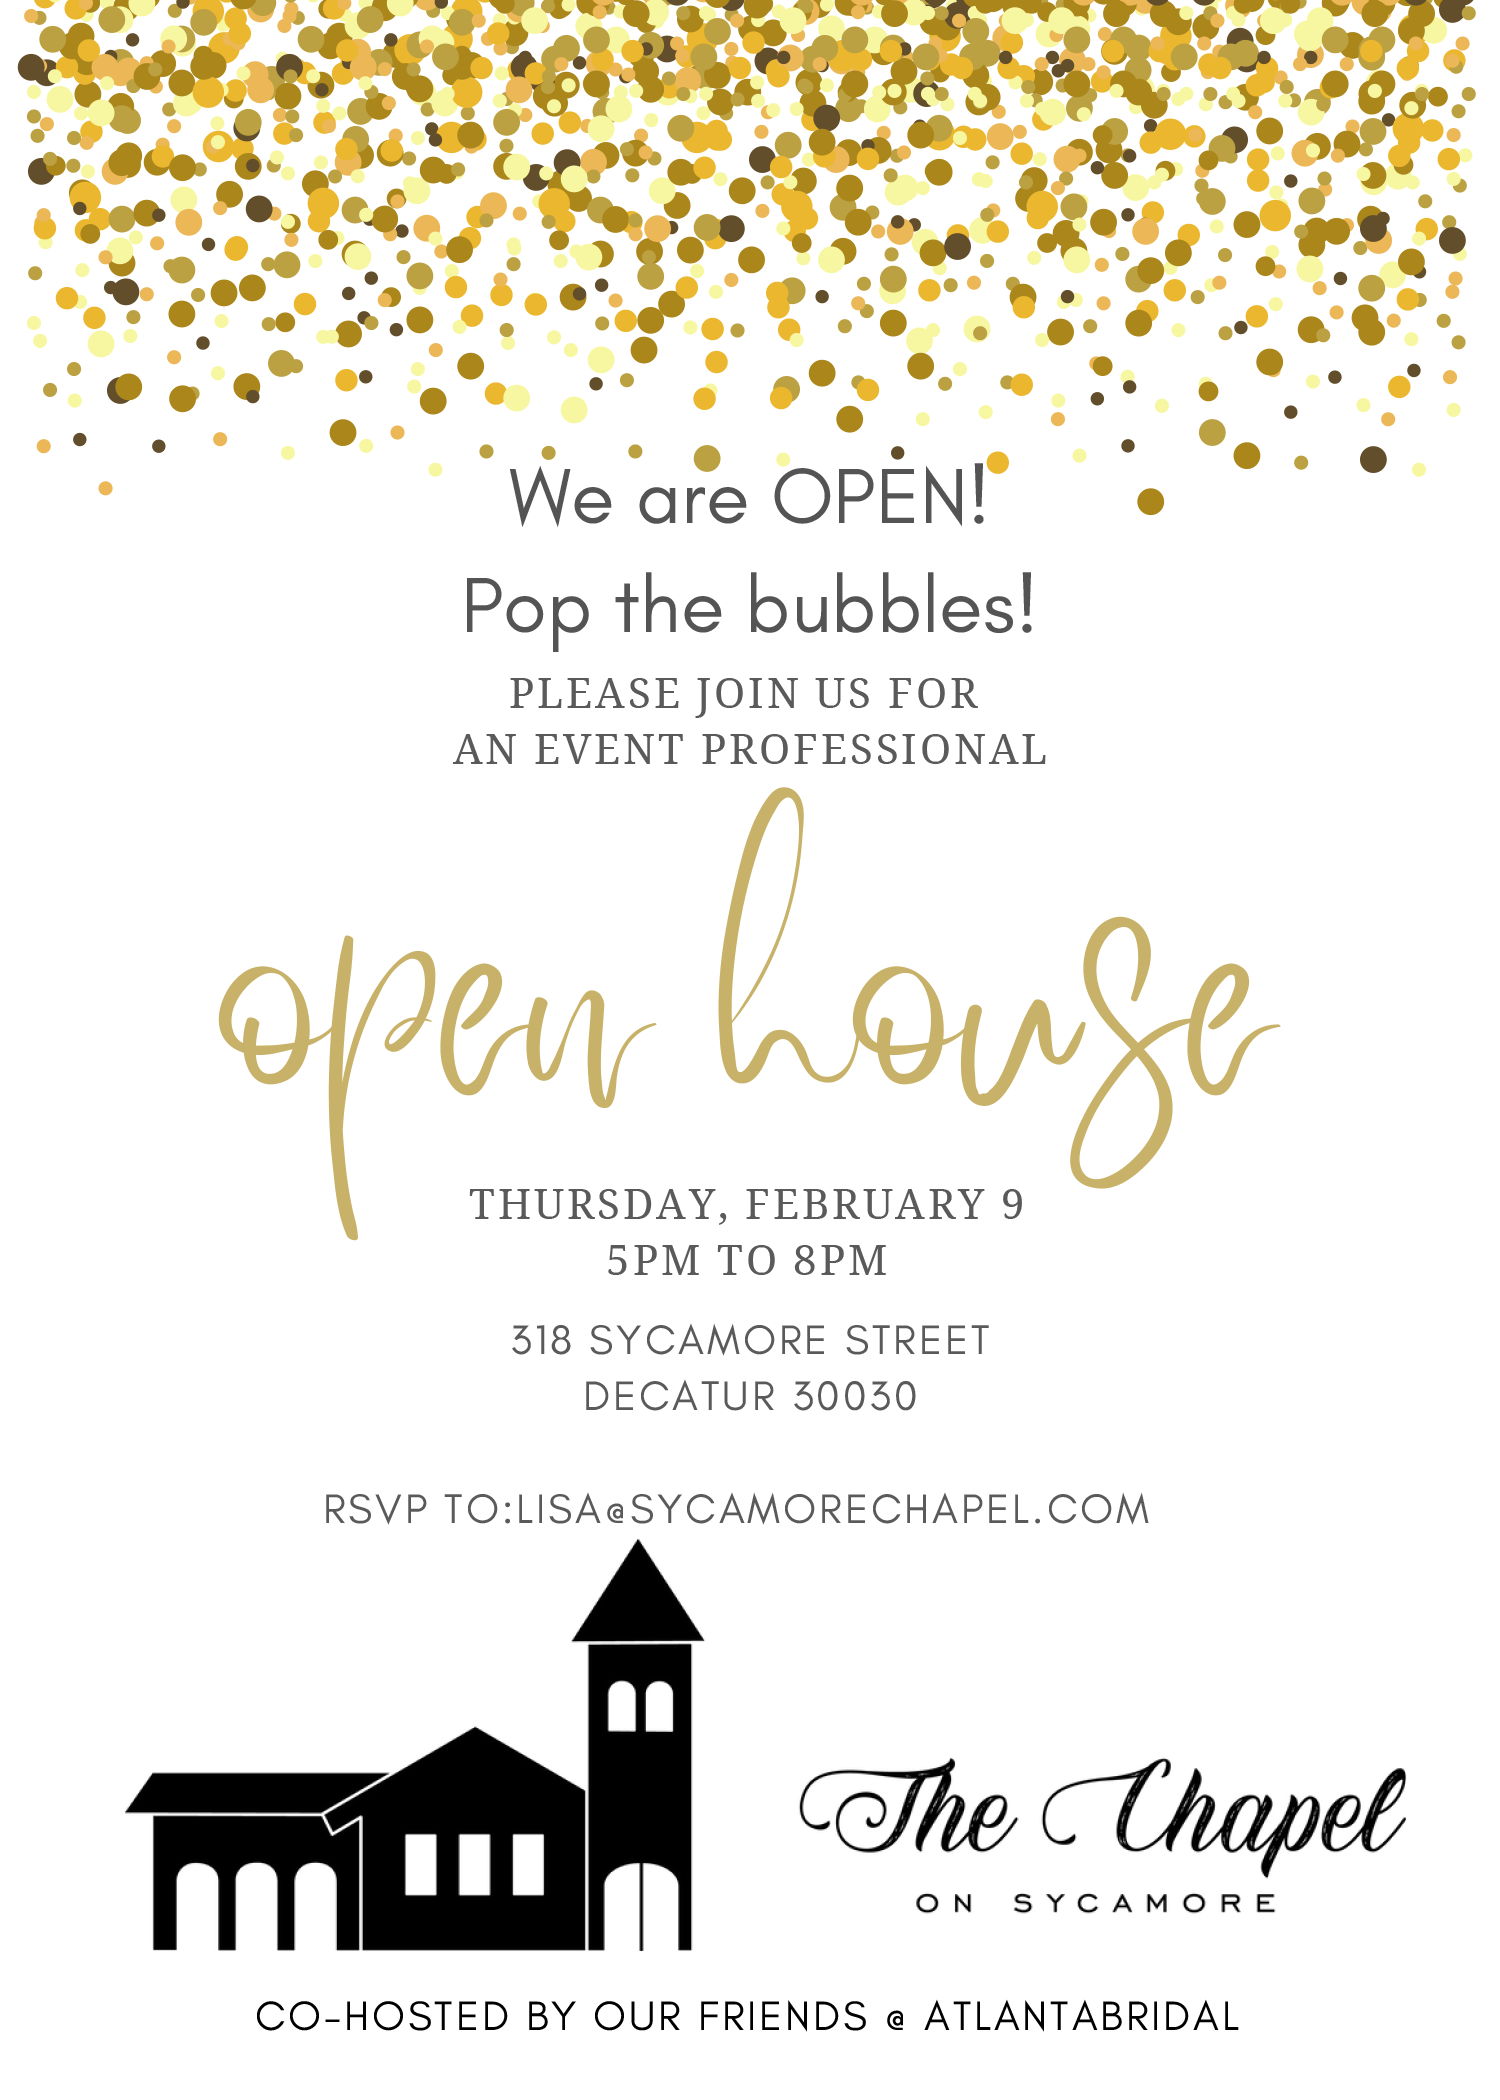 Open House and Networking Event for Wedding Professionals at The Chapel on Sycamore